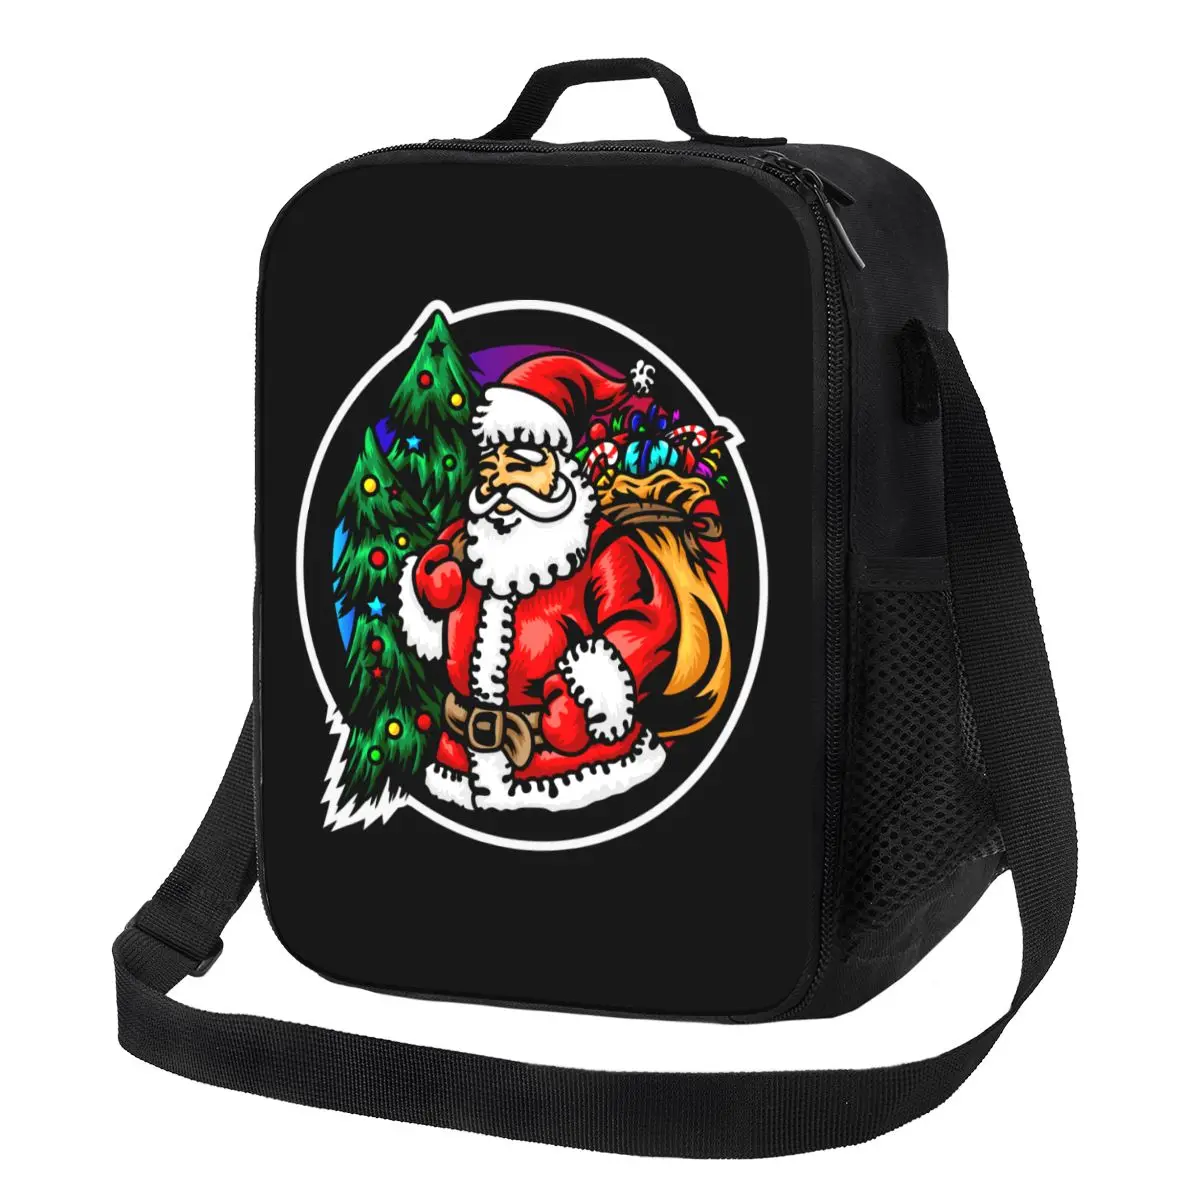 

Santa Claus Insulated Lunch Bag for Outdoor Picnic Merry Christmas Sweater Jingle Bells Gift Portable Thermal Cooler Bento Box